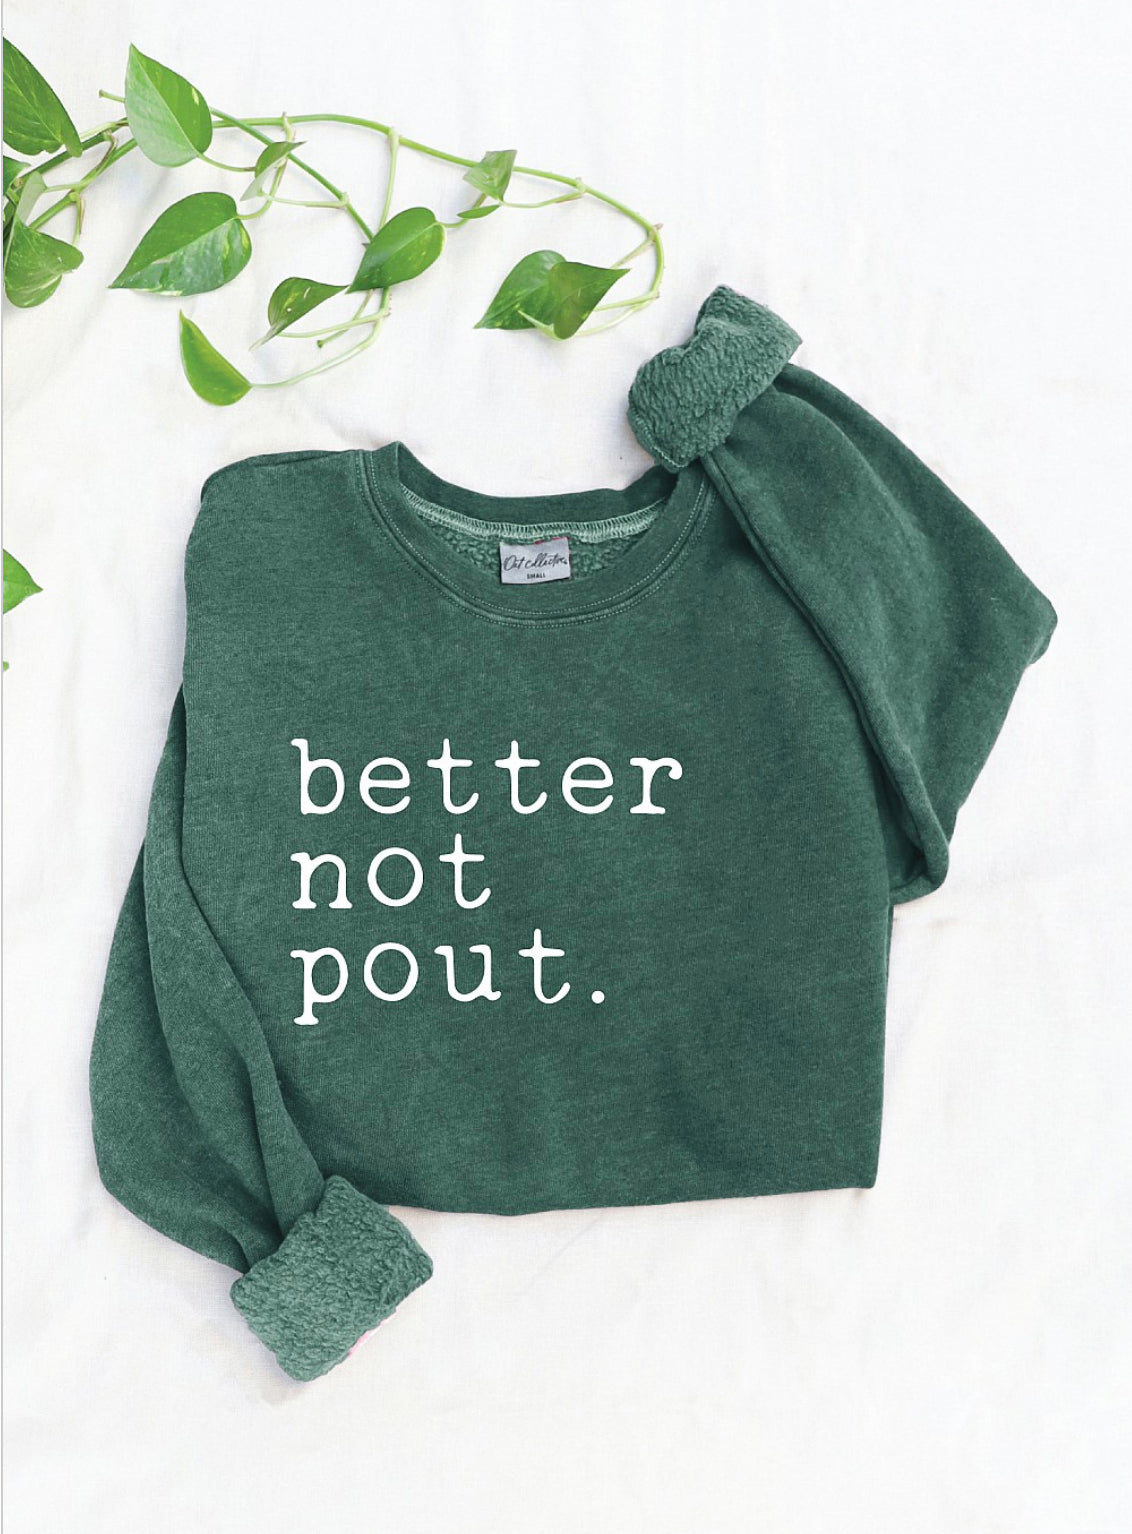 BETTER NOT POUT Pullover, Three colors